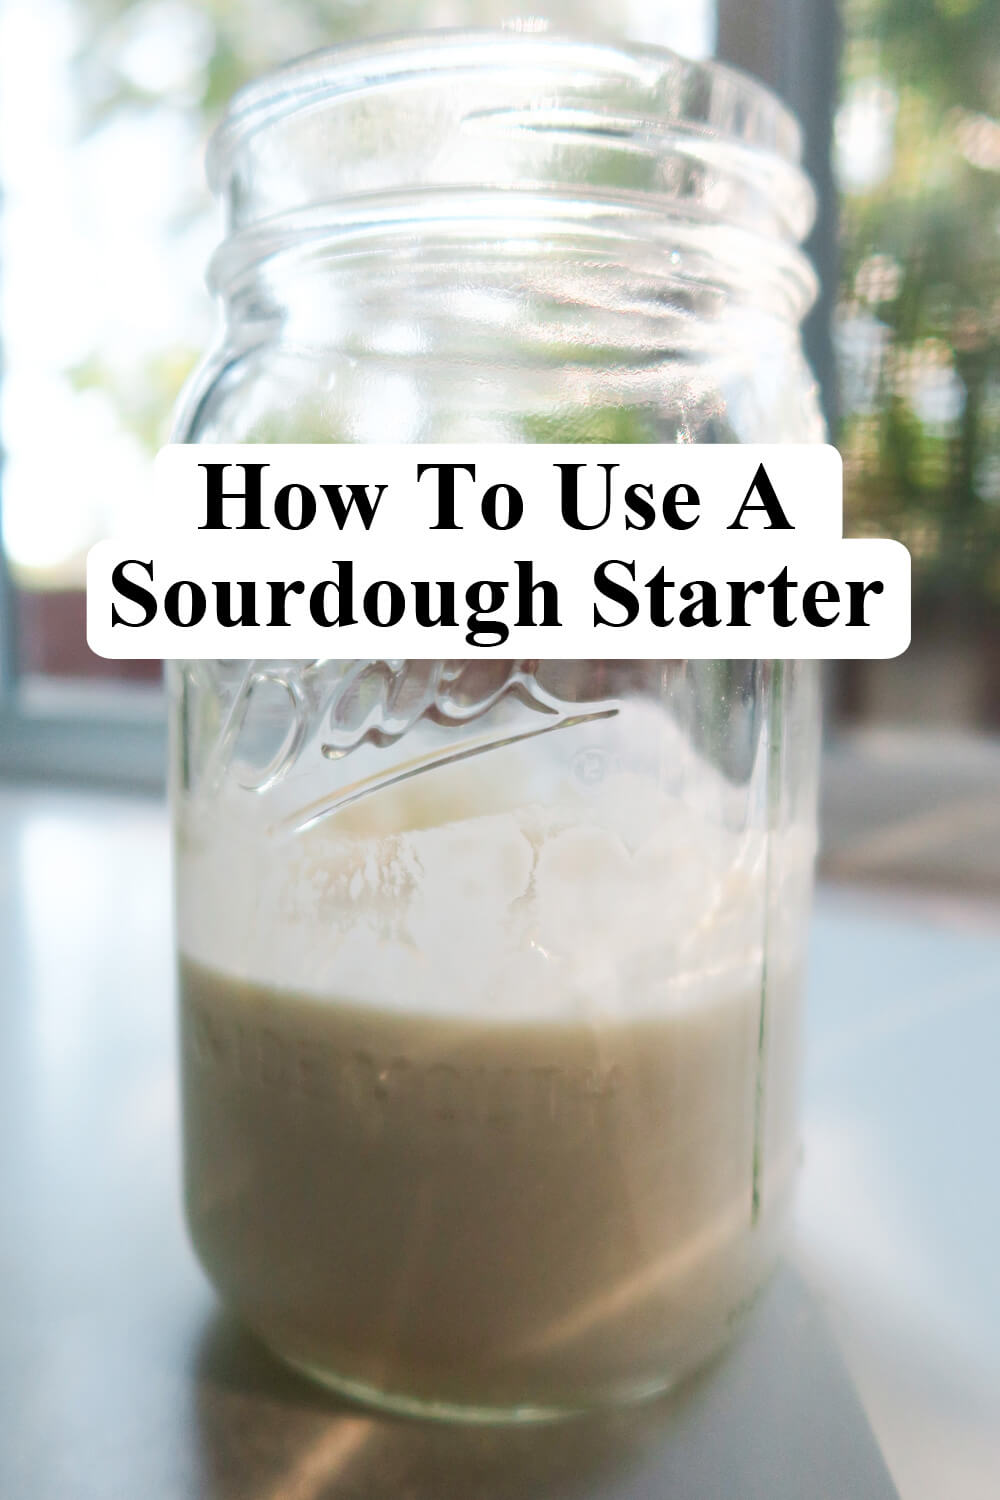 How To Use A Sourdough Starter